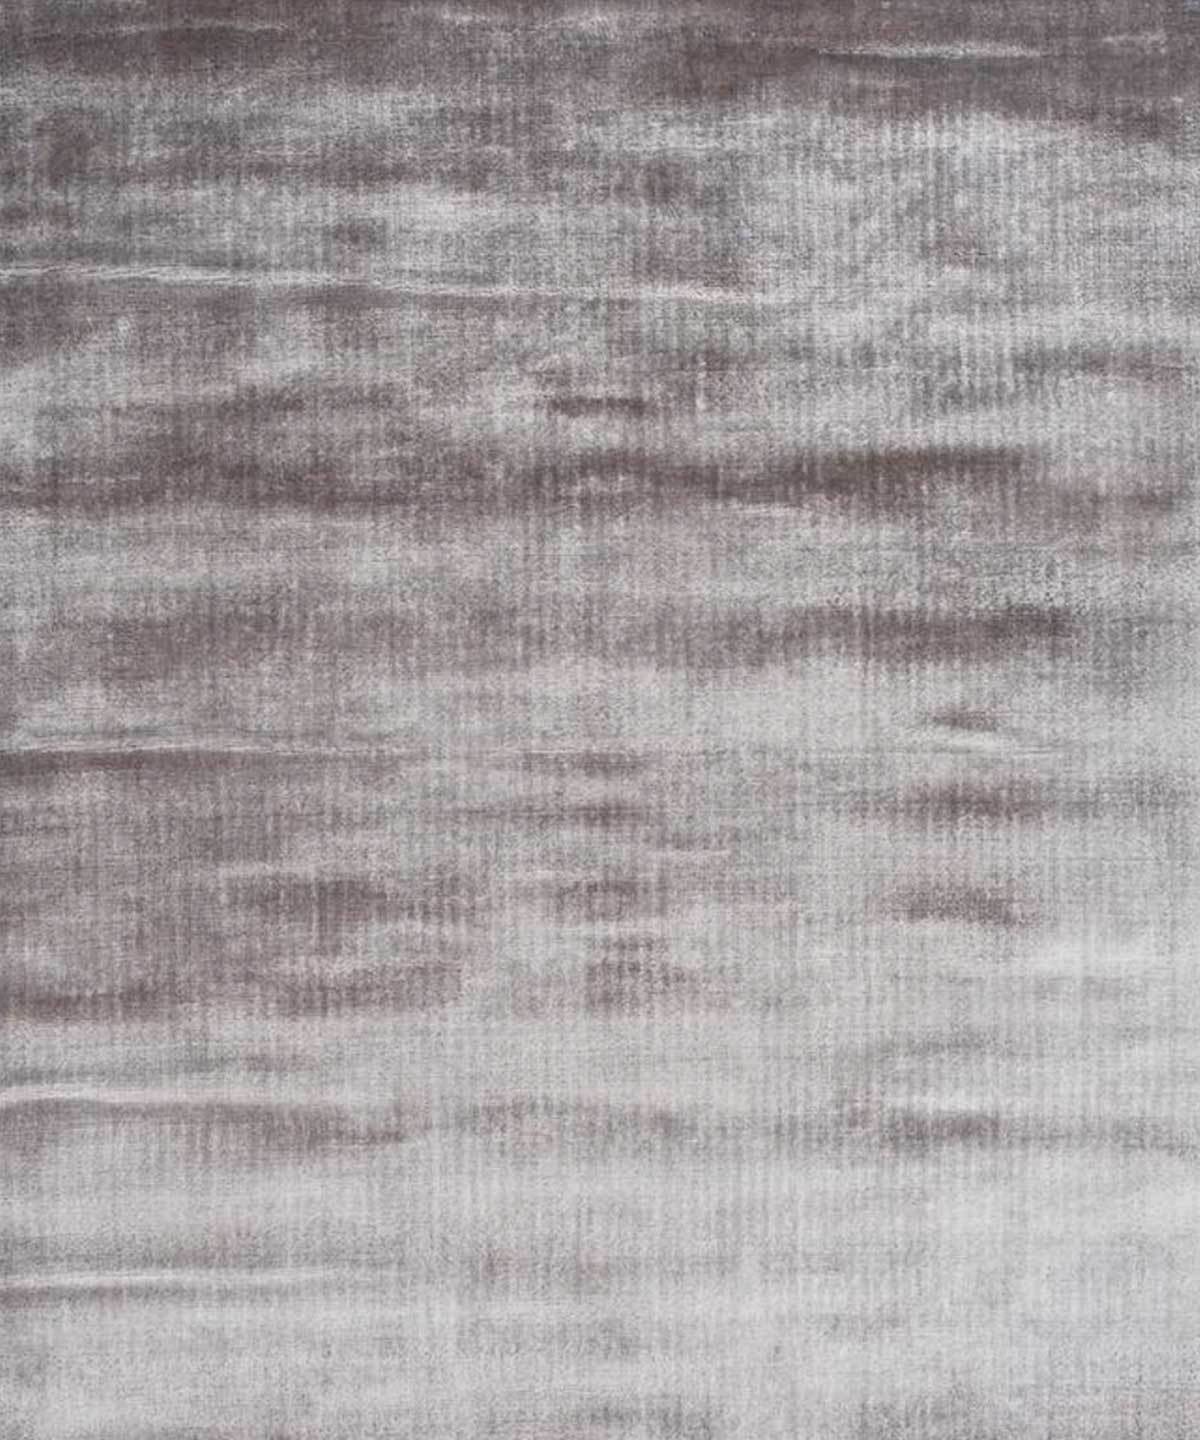 Lucens Rug in Silver by Loloi | TRNK